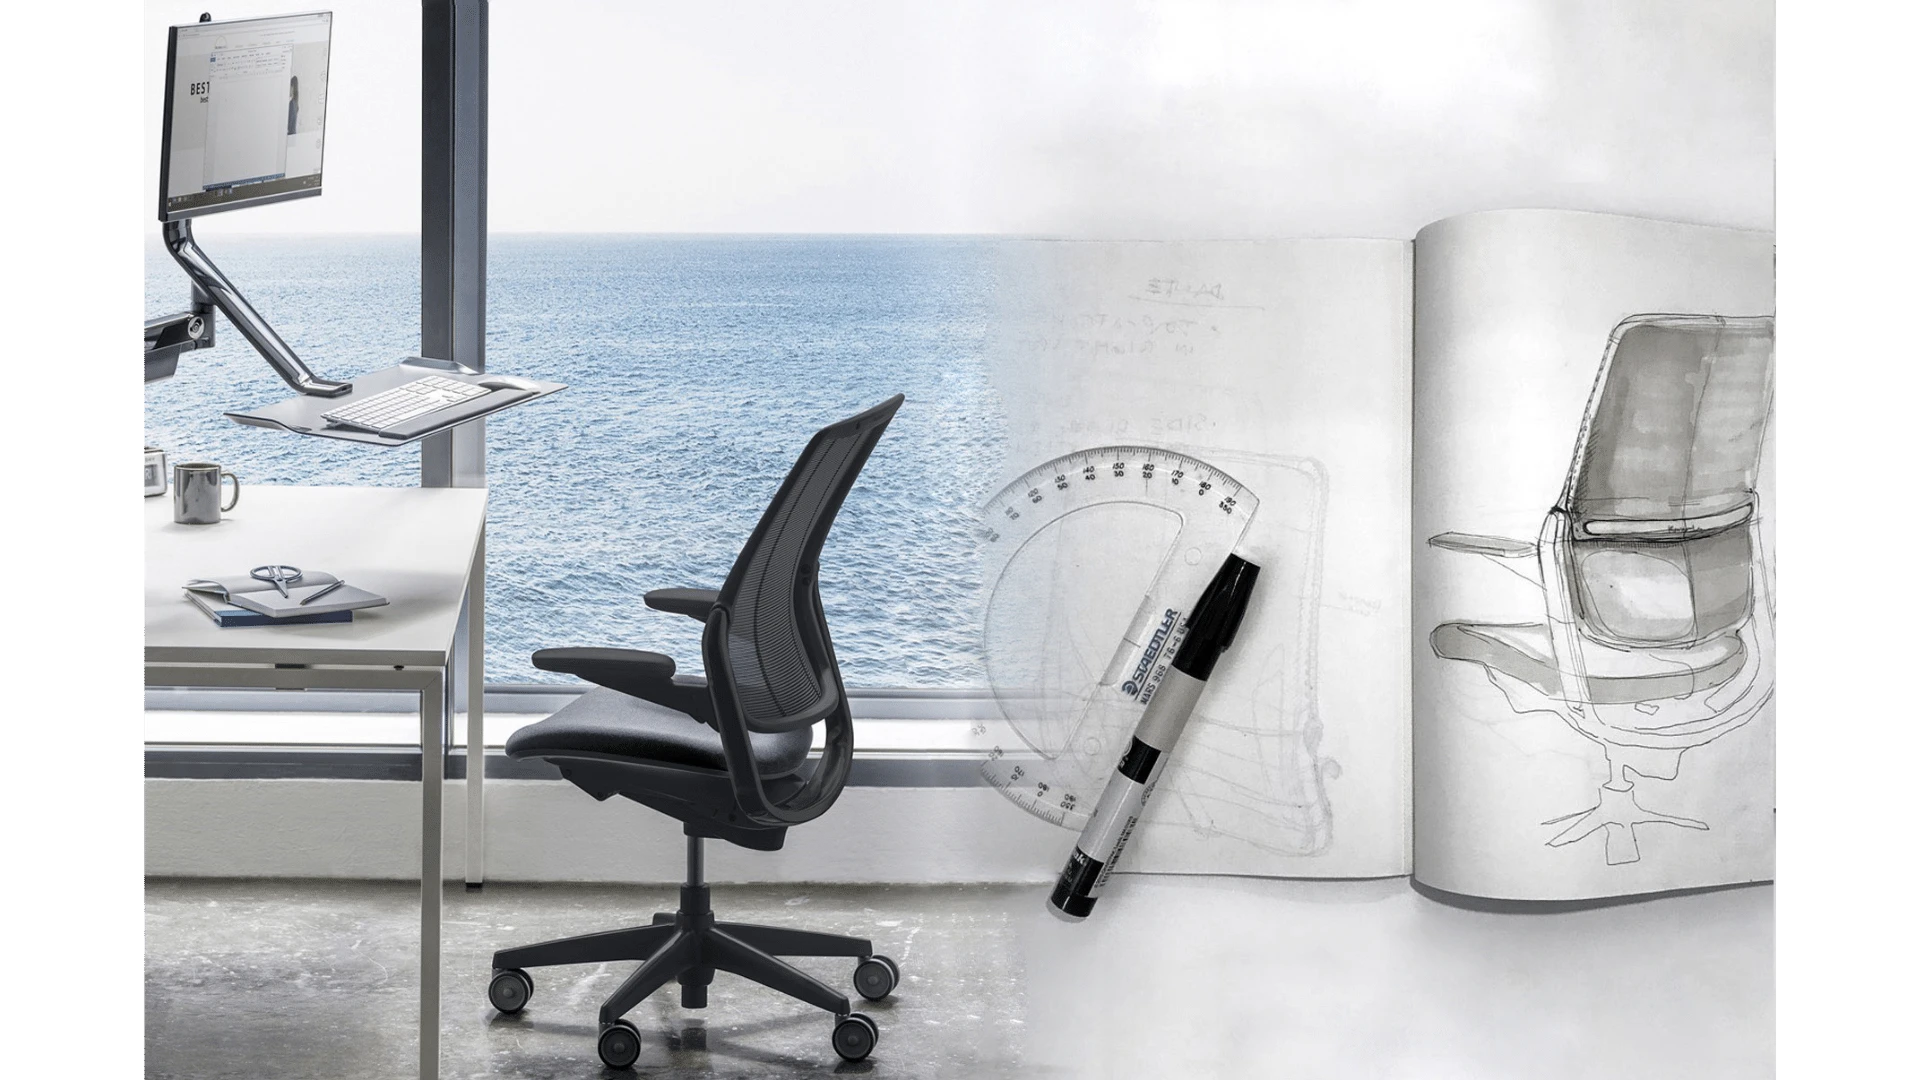 Humanscale recycled ocean chair